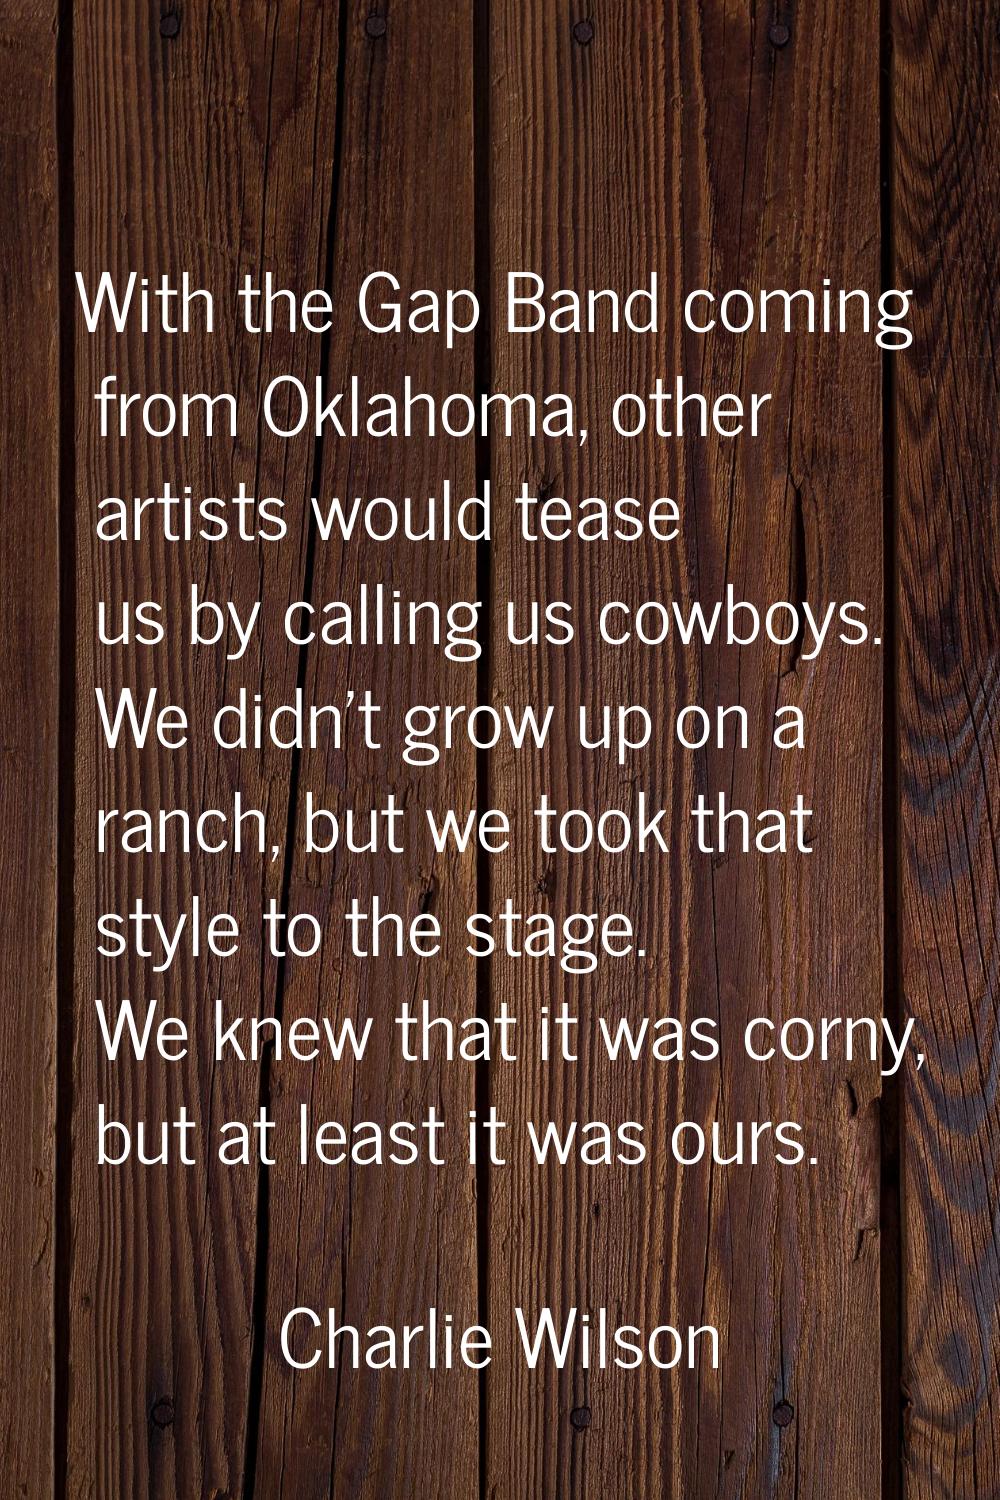 With the Gap Band coming from Oklahoma, other artists would tease us by calling us cowboys. We didn